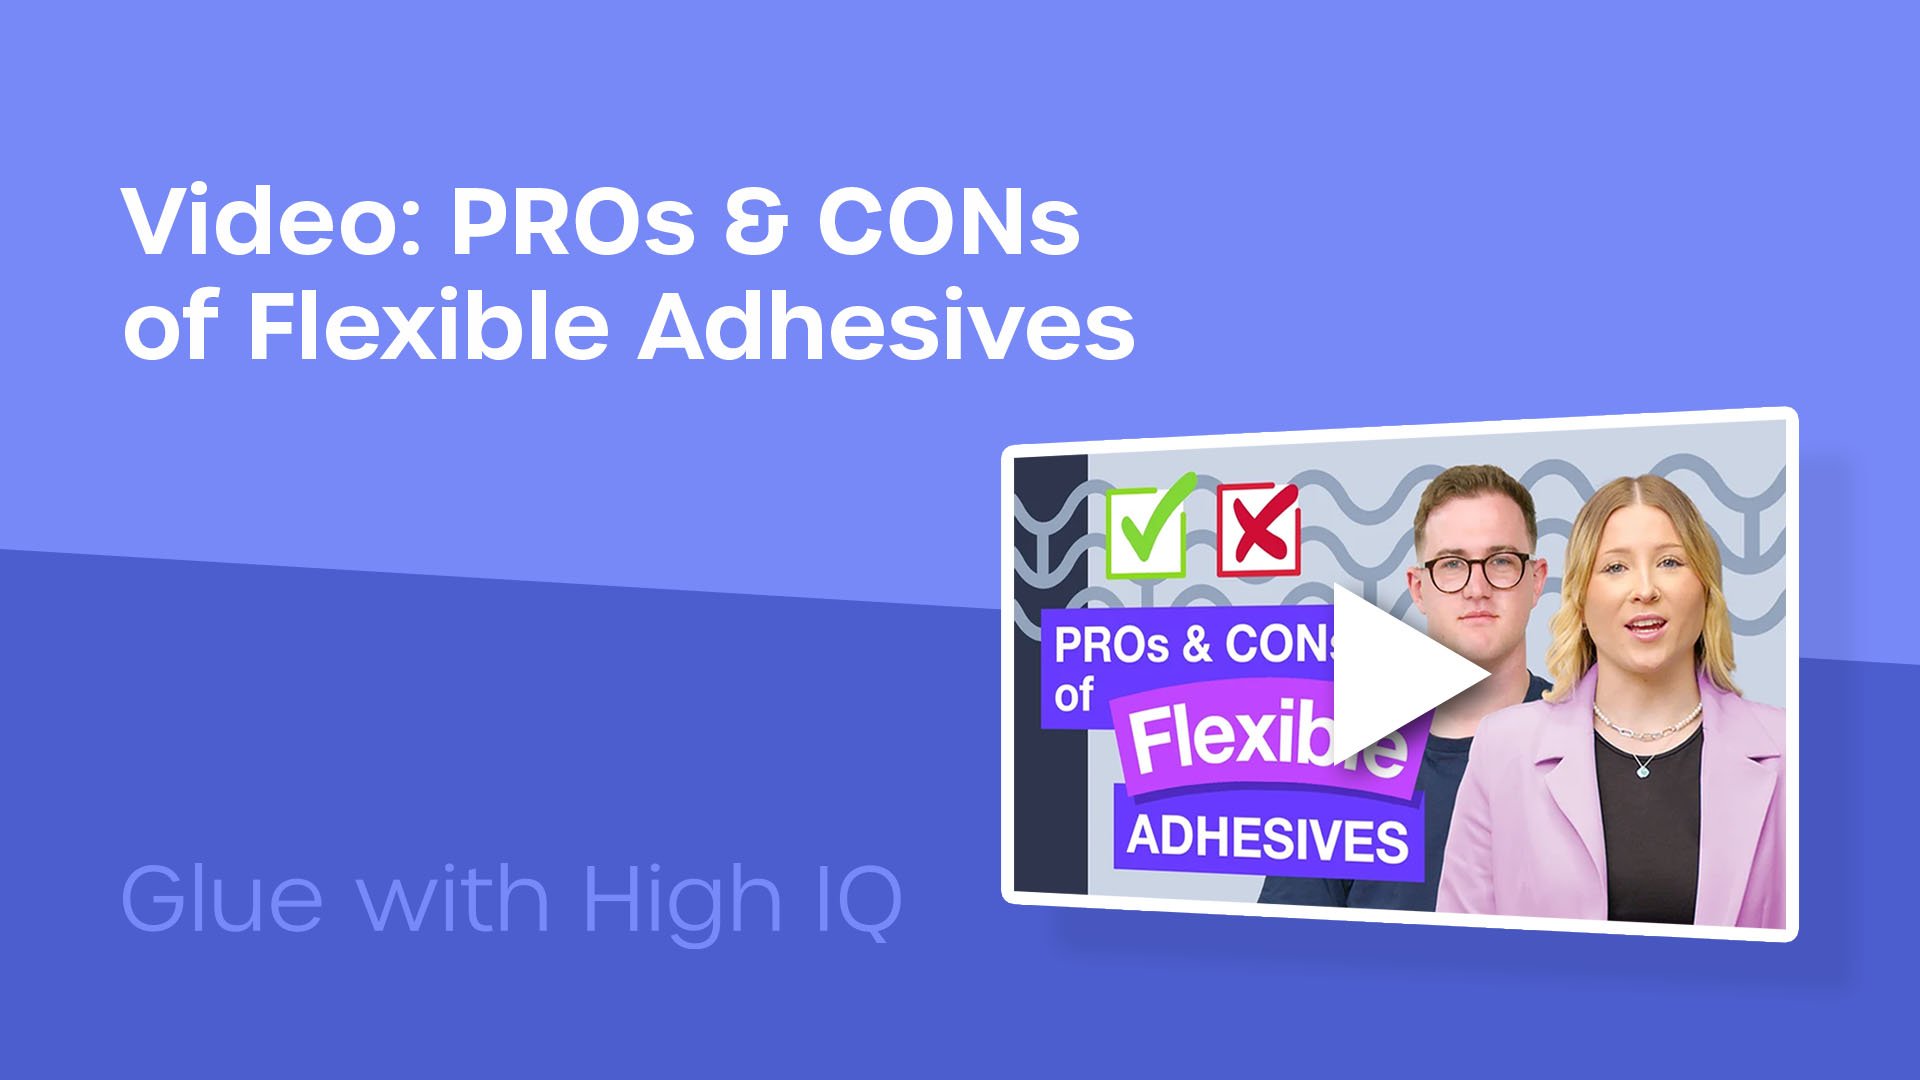 Pros and cons of flexible adhesives